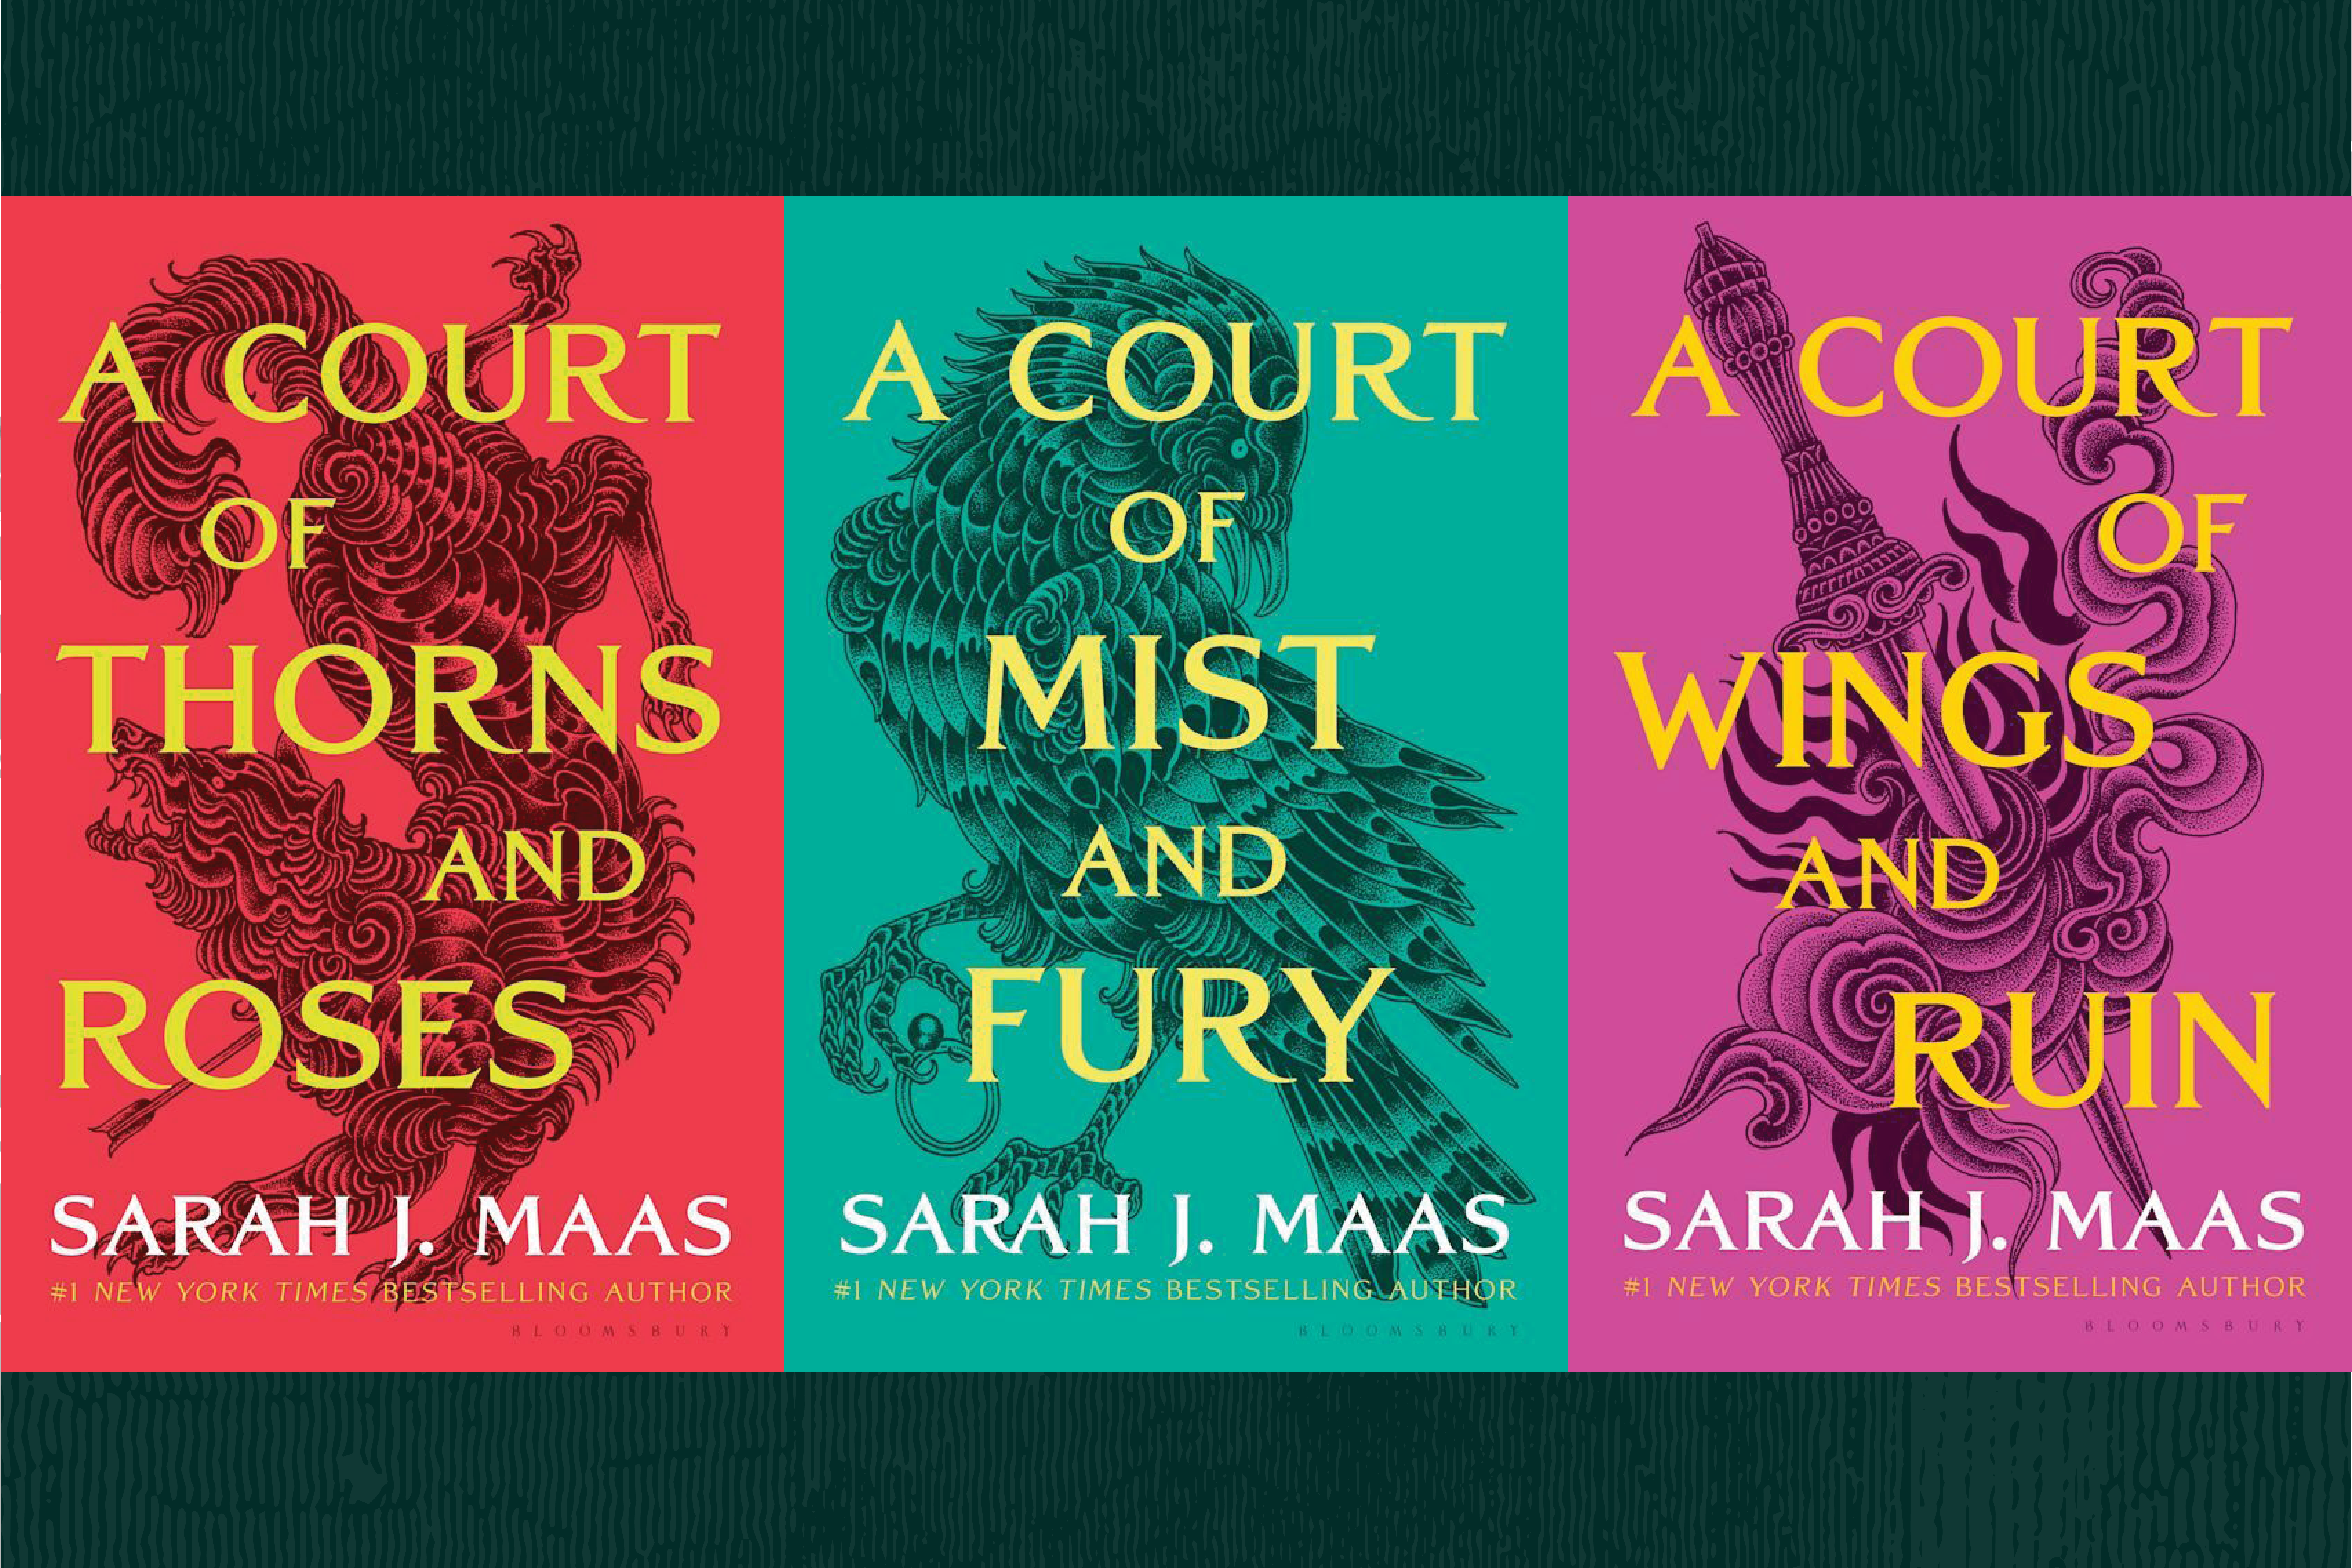 Three book covers in a row: A Court of Thorns and Roses, A Court of Mist and Fury, A Court of Wings and Ruin